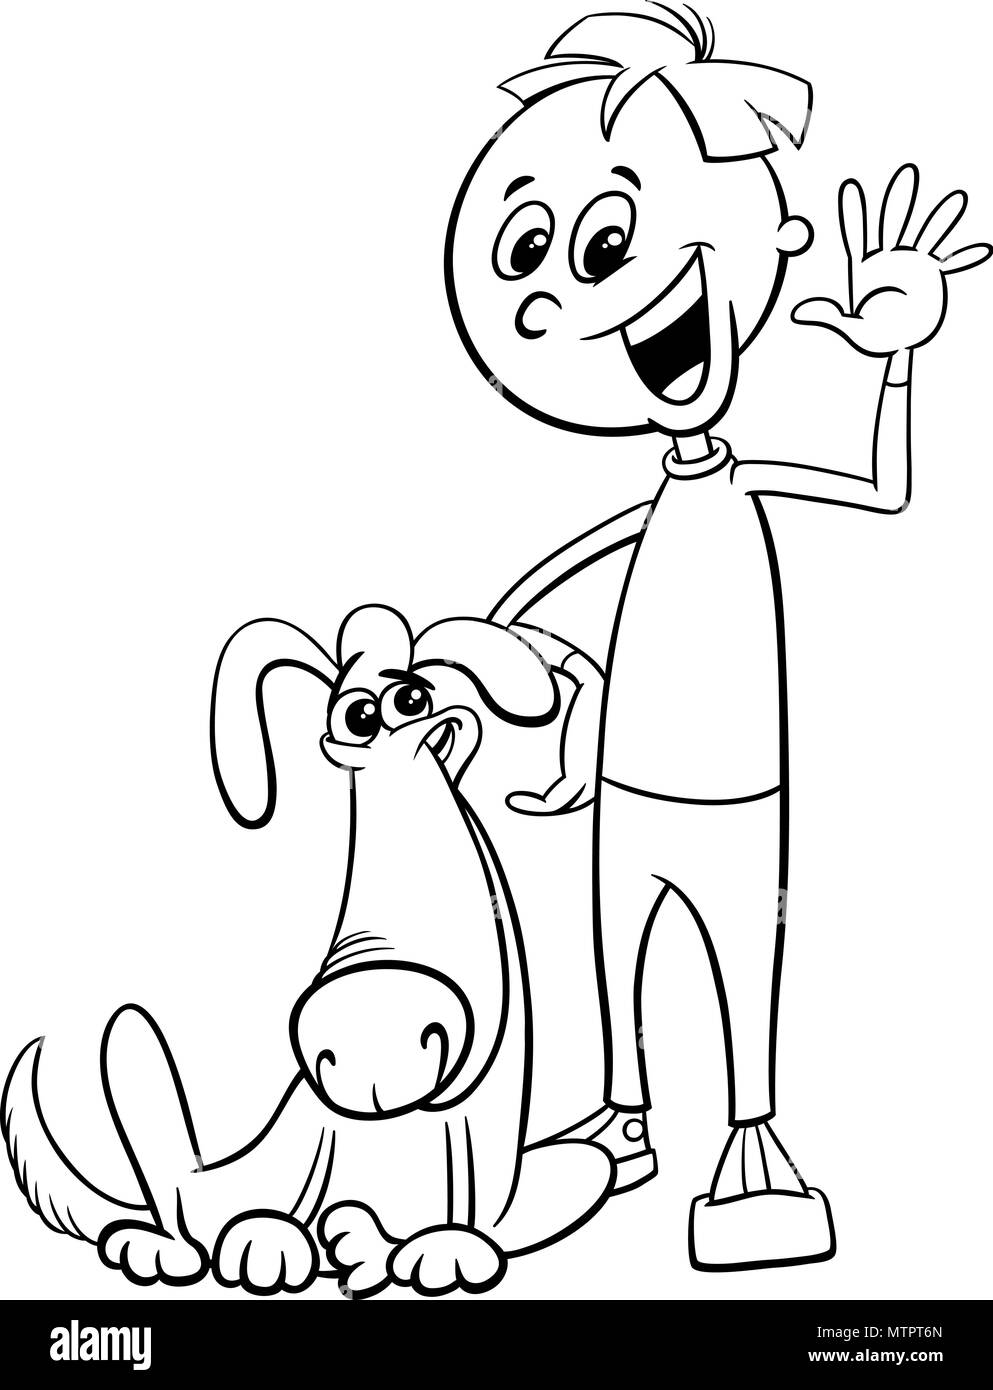 Black and White Cartoon Illustration of Kid or Teen Boy with Funny Dog Coloring Book Stock Vector